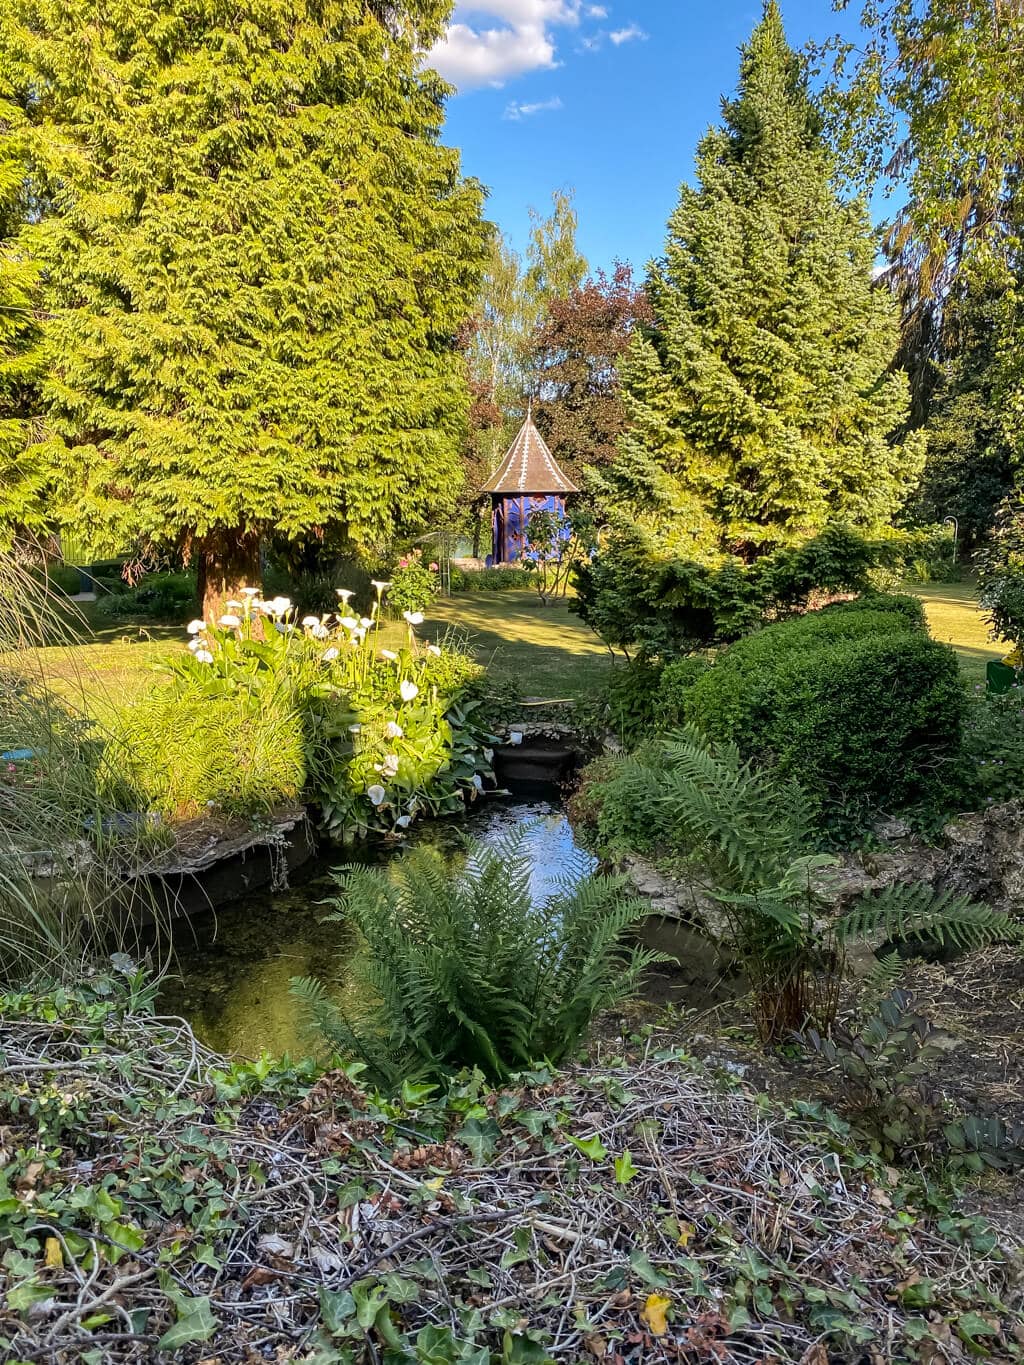 view of the garden looking over a small lake